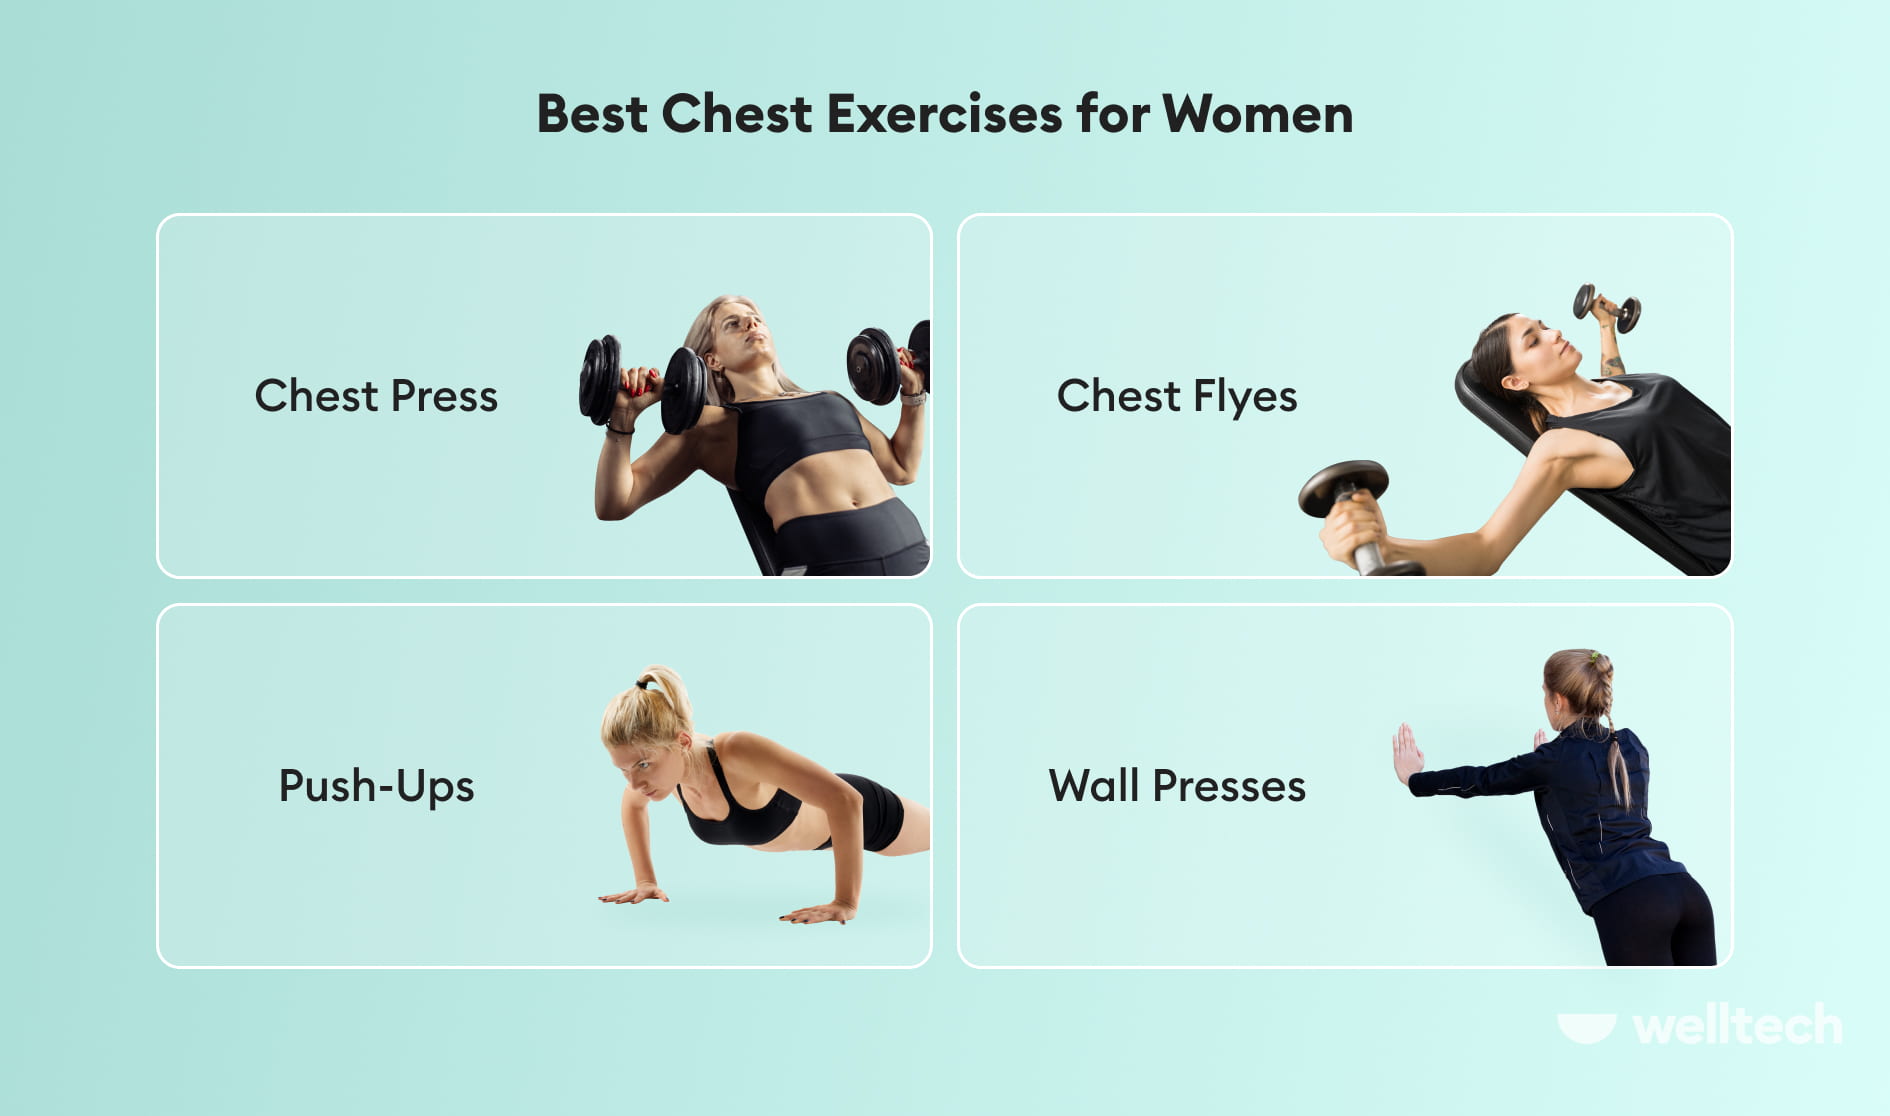 four Best Chest Exercises for Women, chest press, chest flyes, push-ups, wall presses, How to lose weight without losing boobs